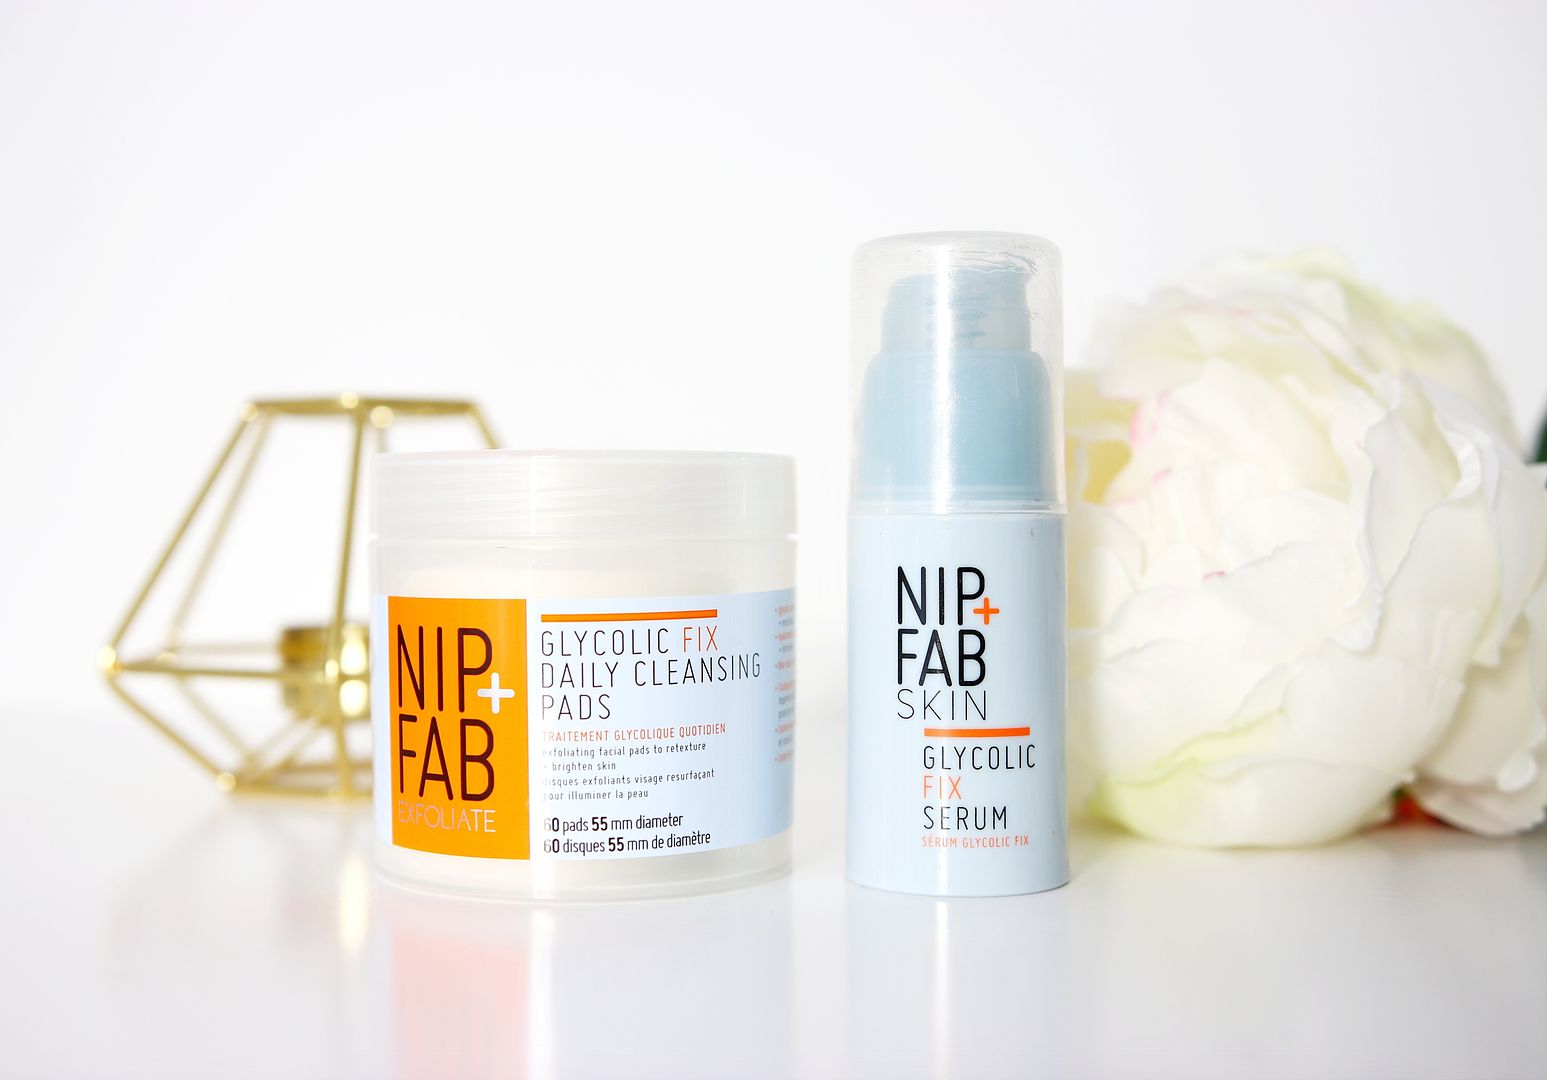 Ni + Fab Glycolic FixDaily Cleansing Pads & Serum